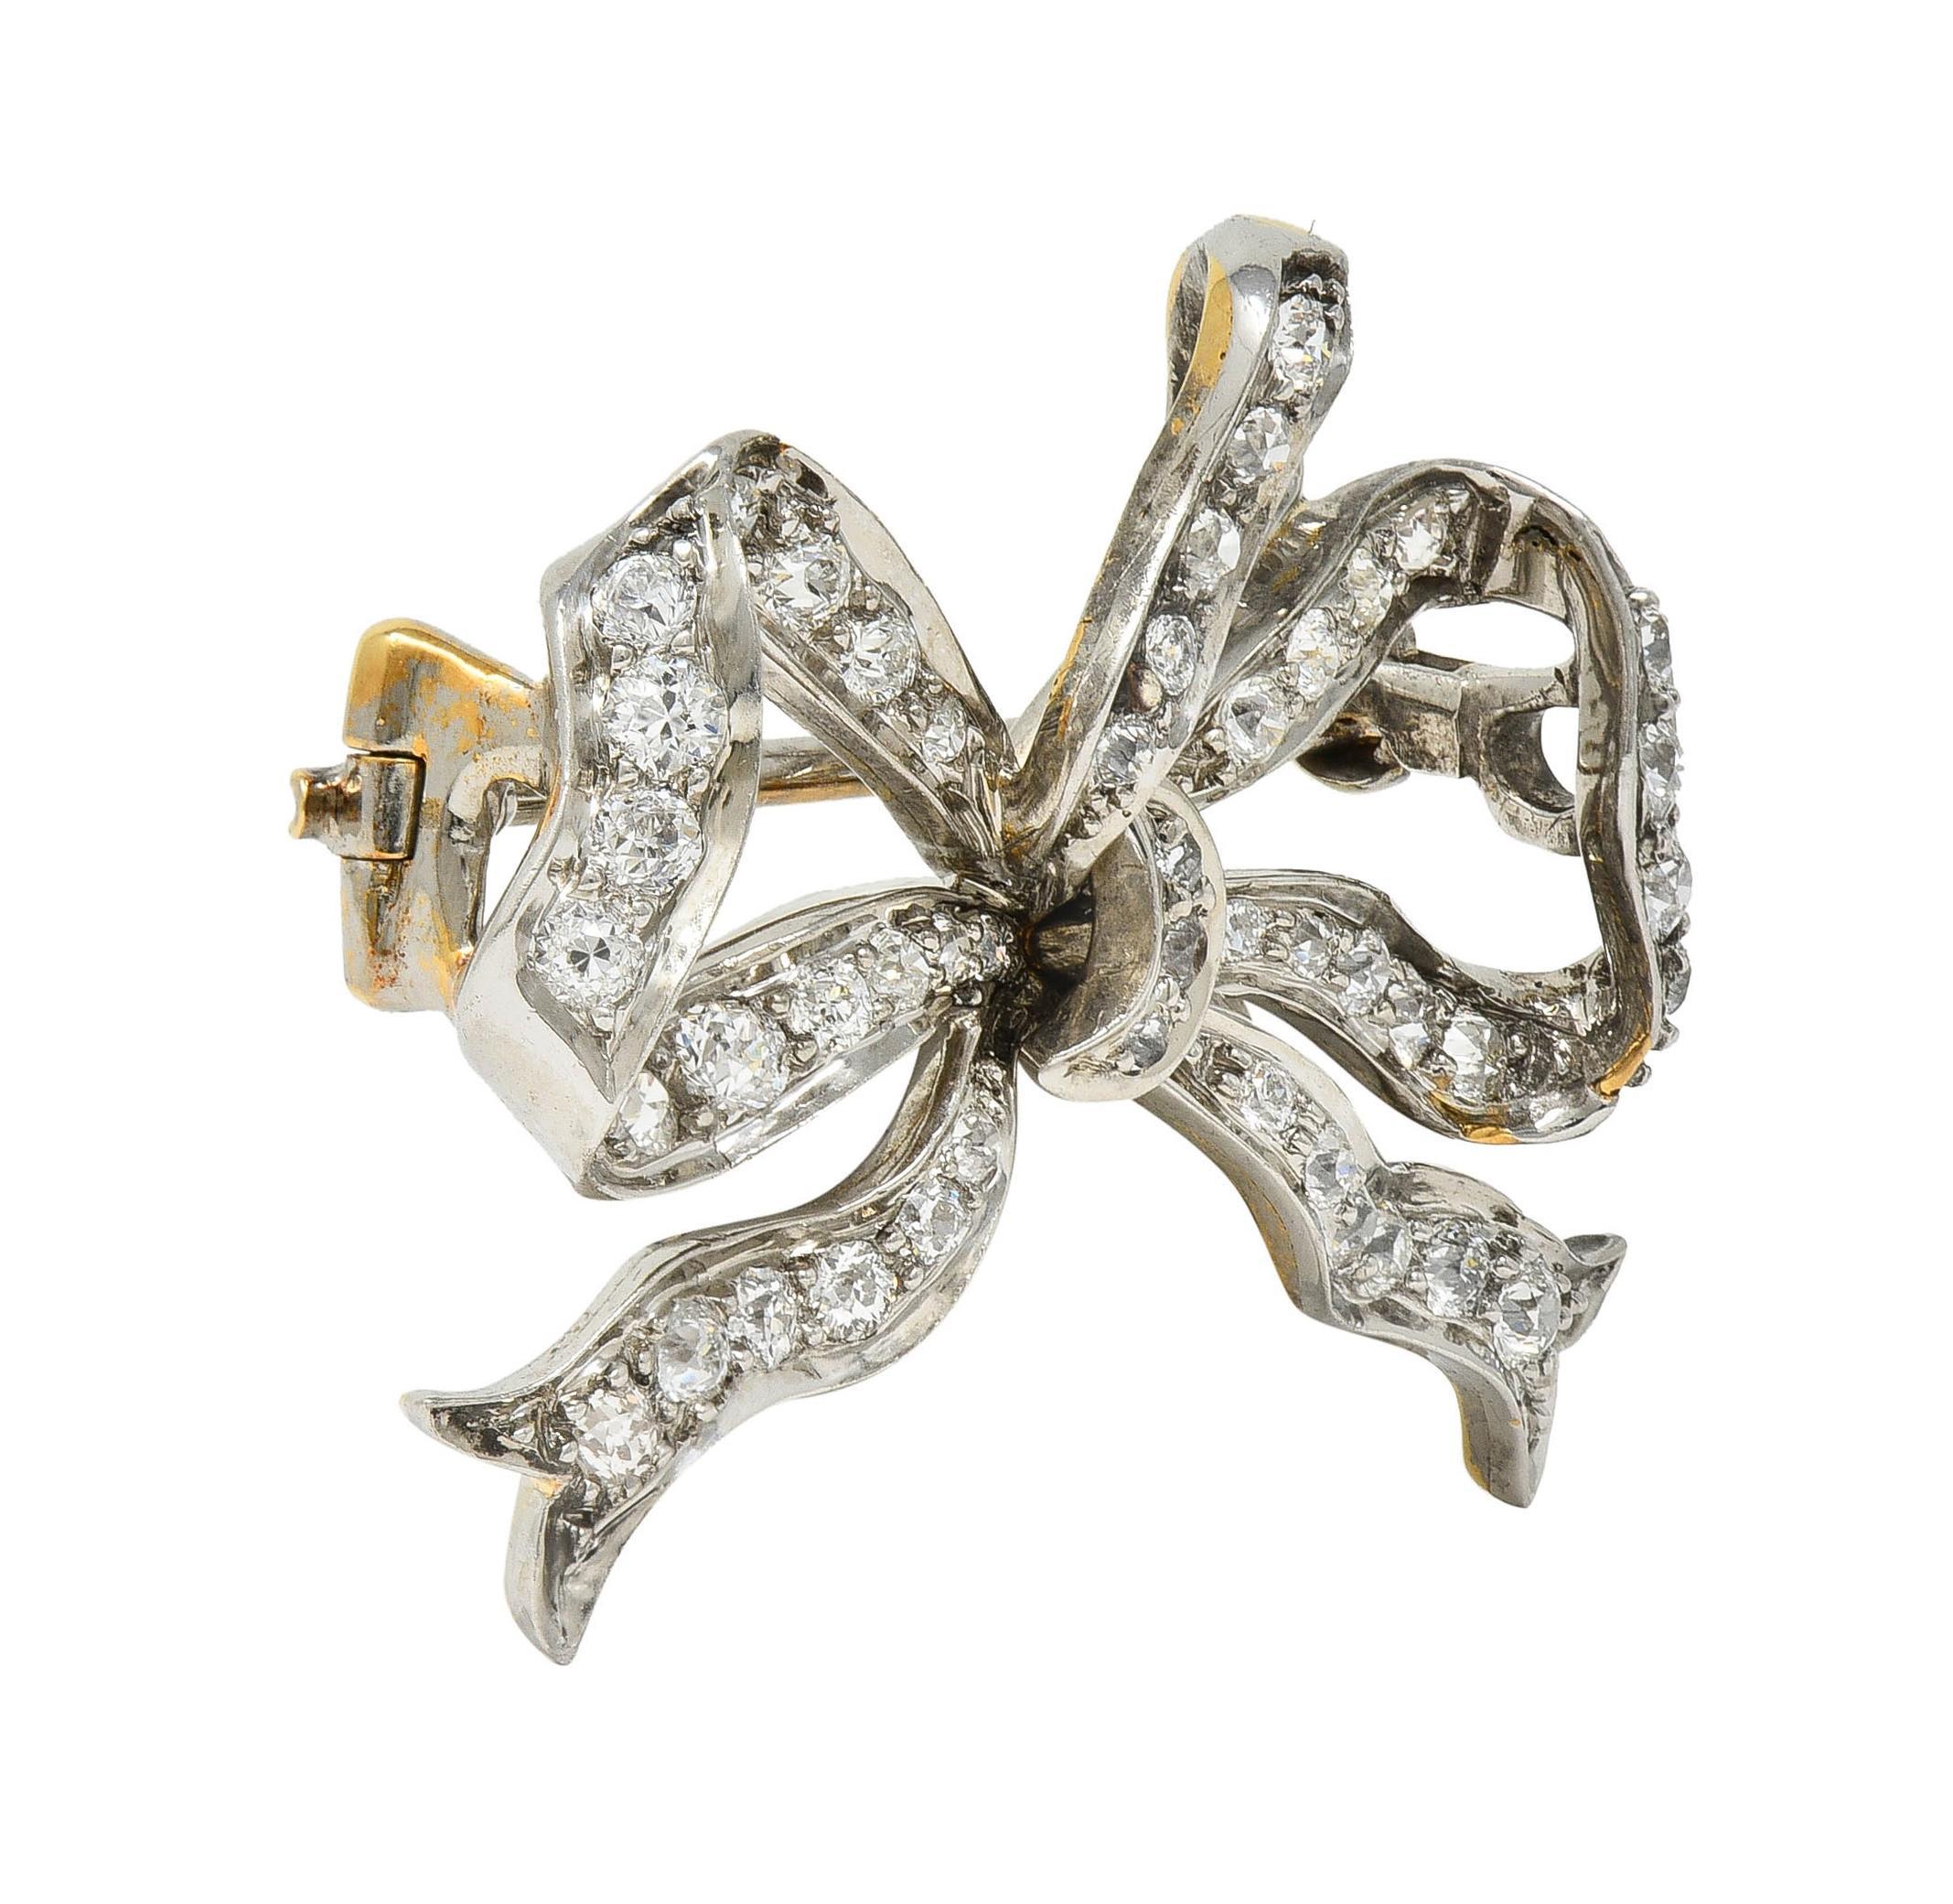 Designed as a dimensional bow of tied ribbon comprised of platinum-topped gold
Bead set throughout with old European cut diamonds
Weighing approximately 1.12 carats total 
G/H color with VS2 to SI1 clarity
Completed by hinged pinstem with locking